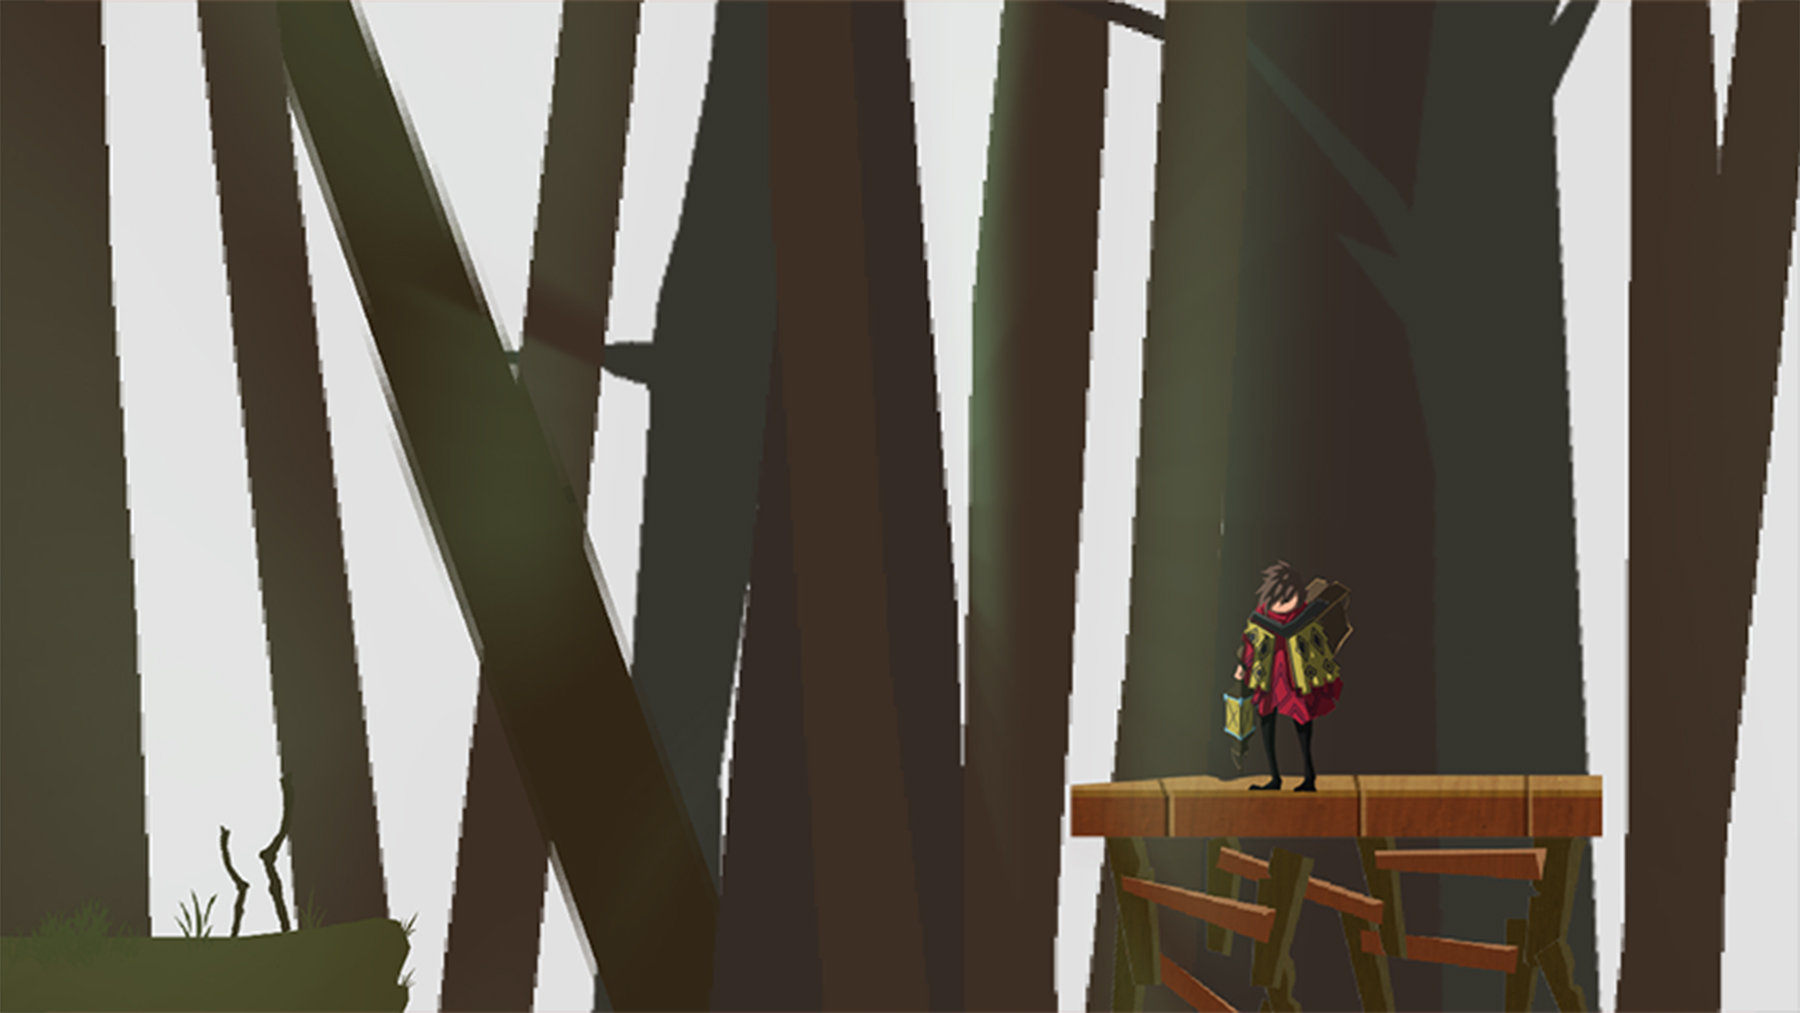 View full size version of a gameplay screenshot of traveler character on a wooden platform